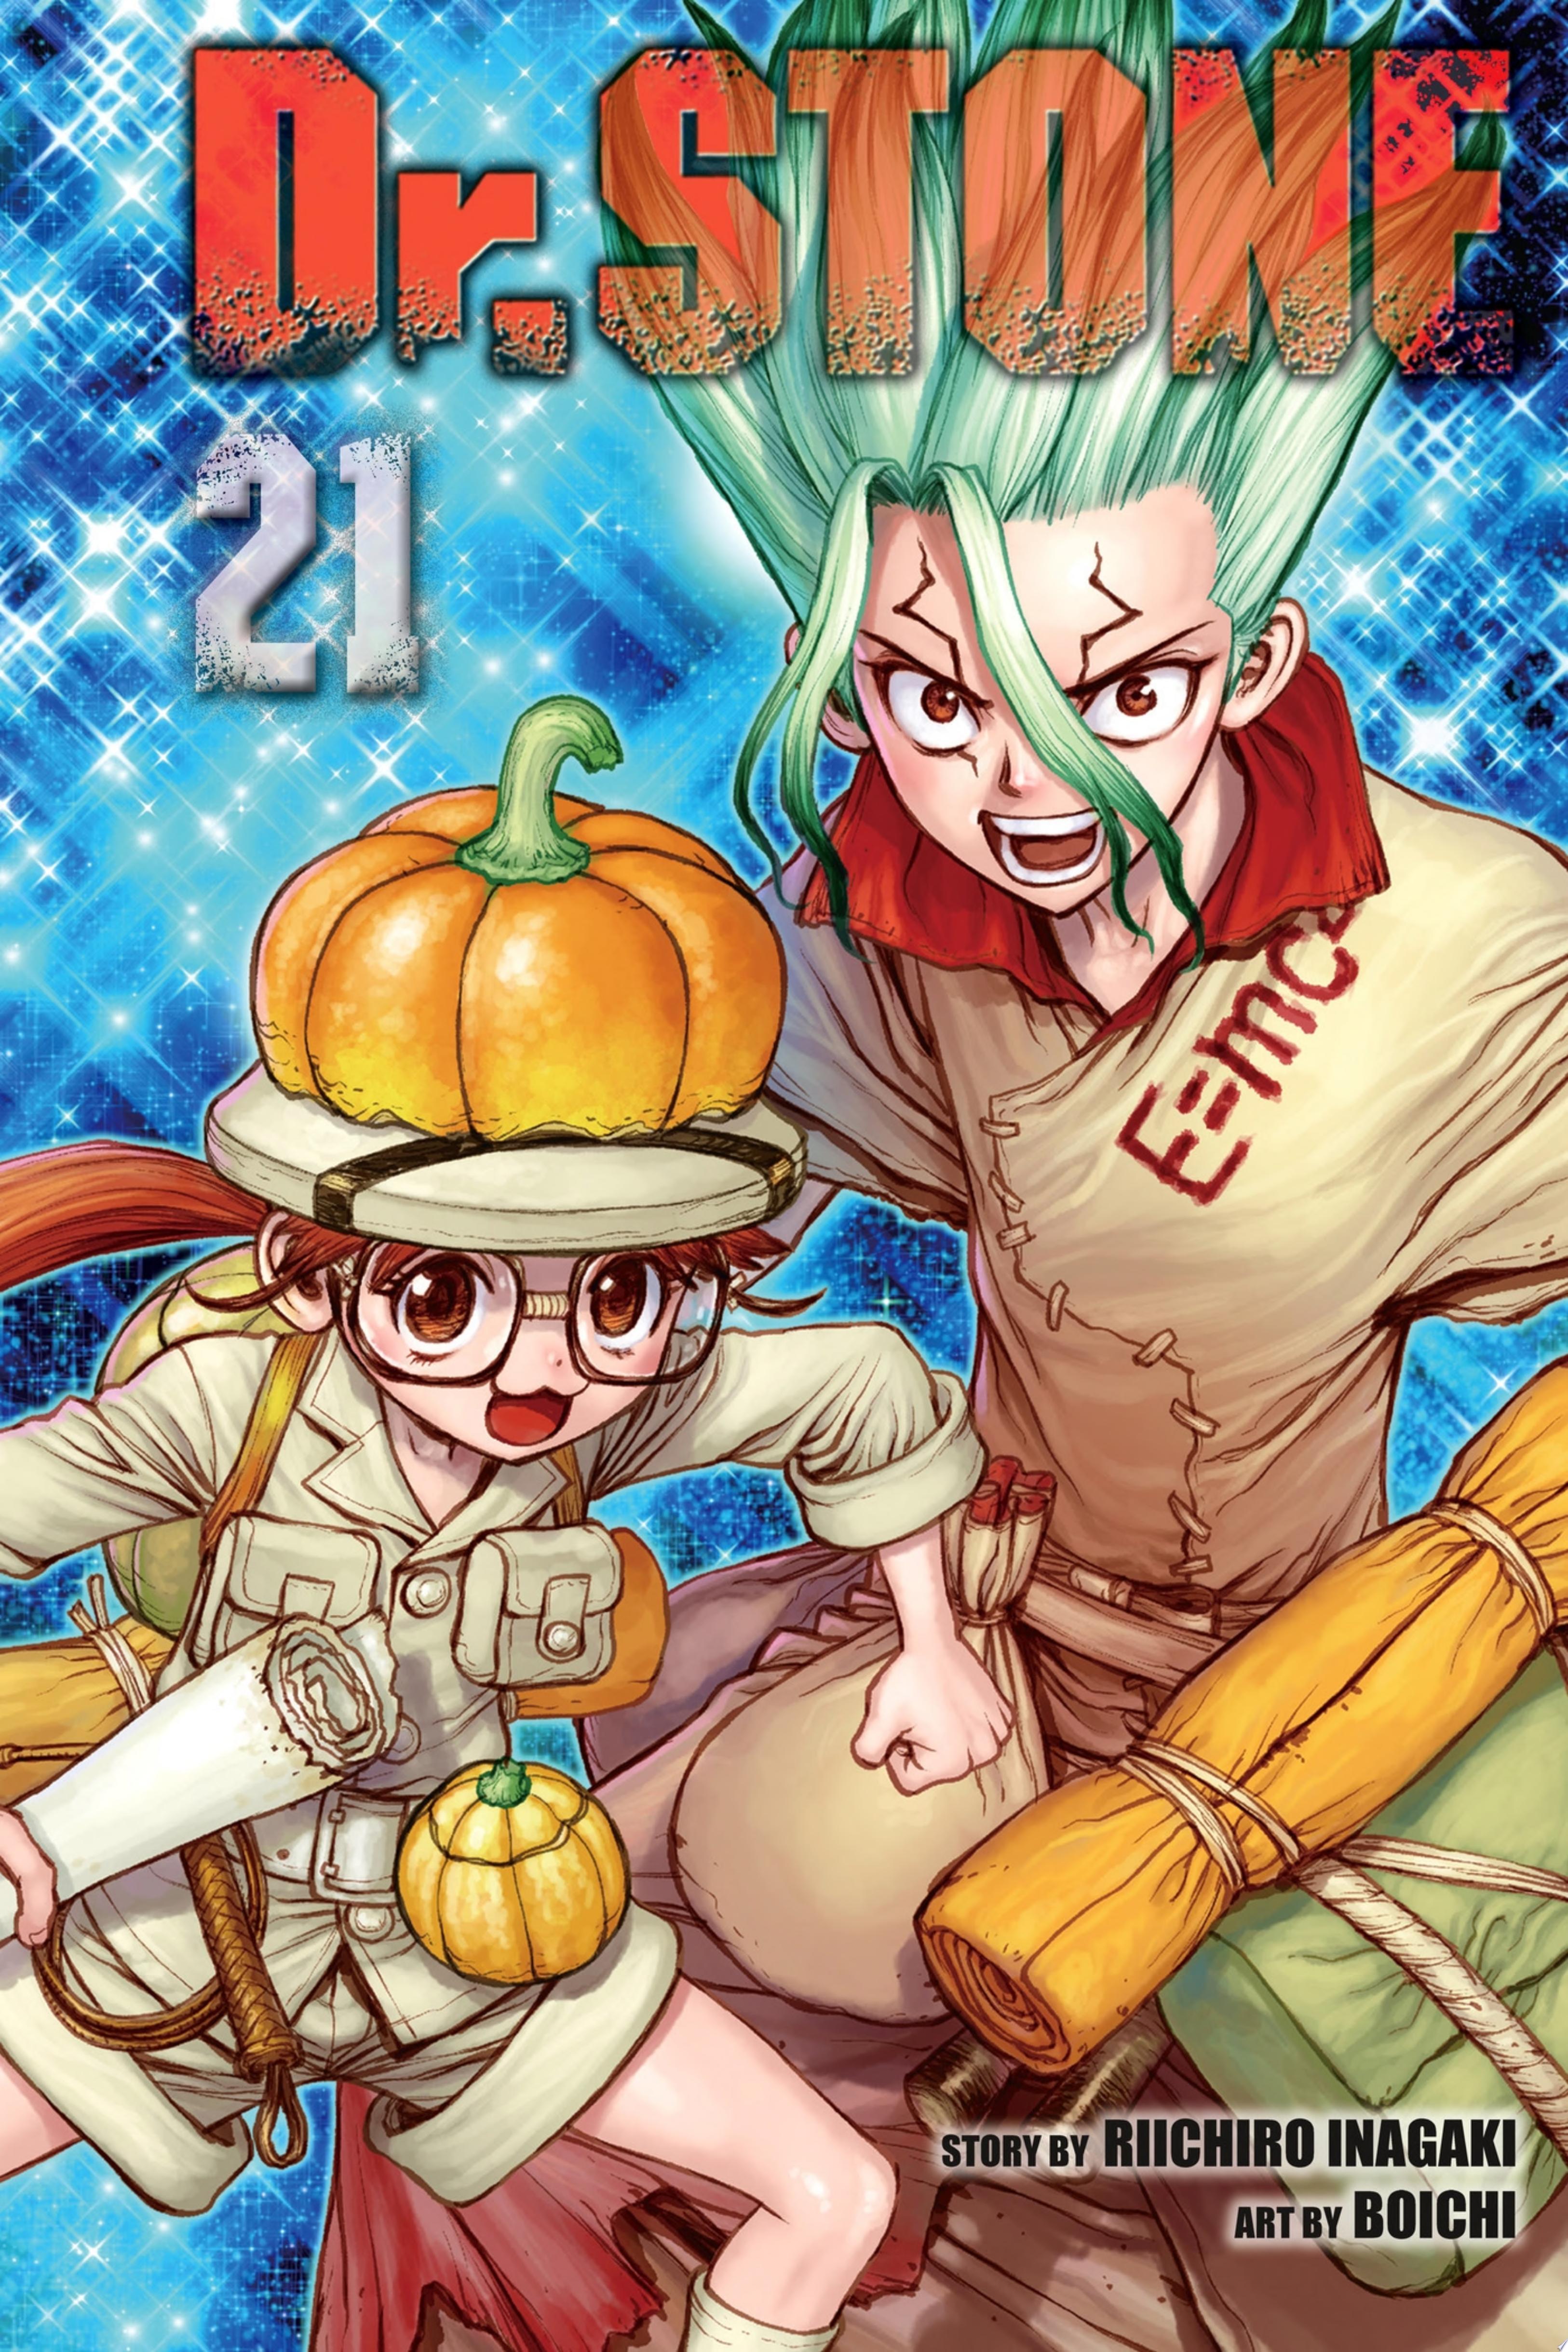 Image for "Dr. STONE, Vol. 21"